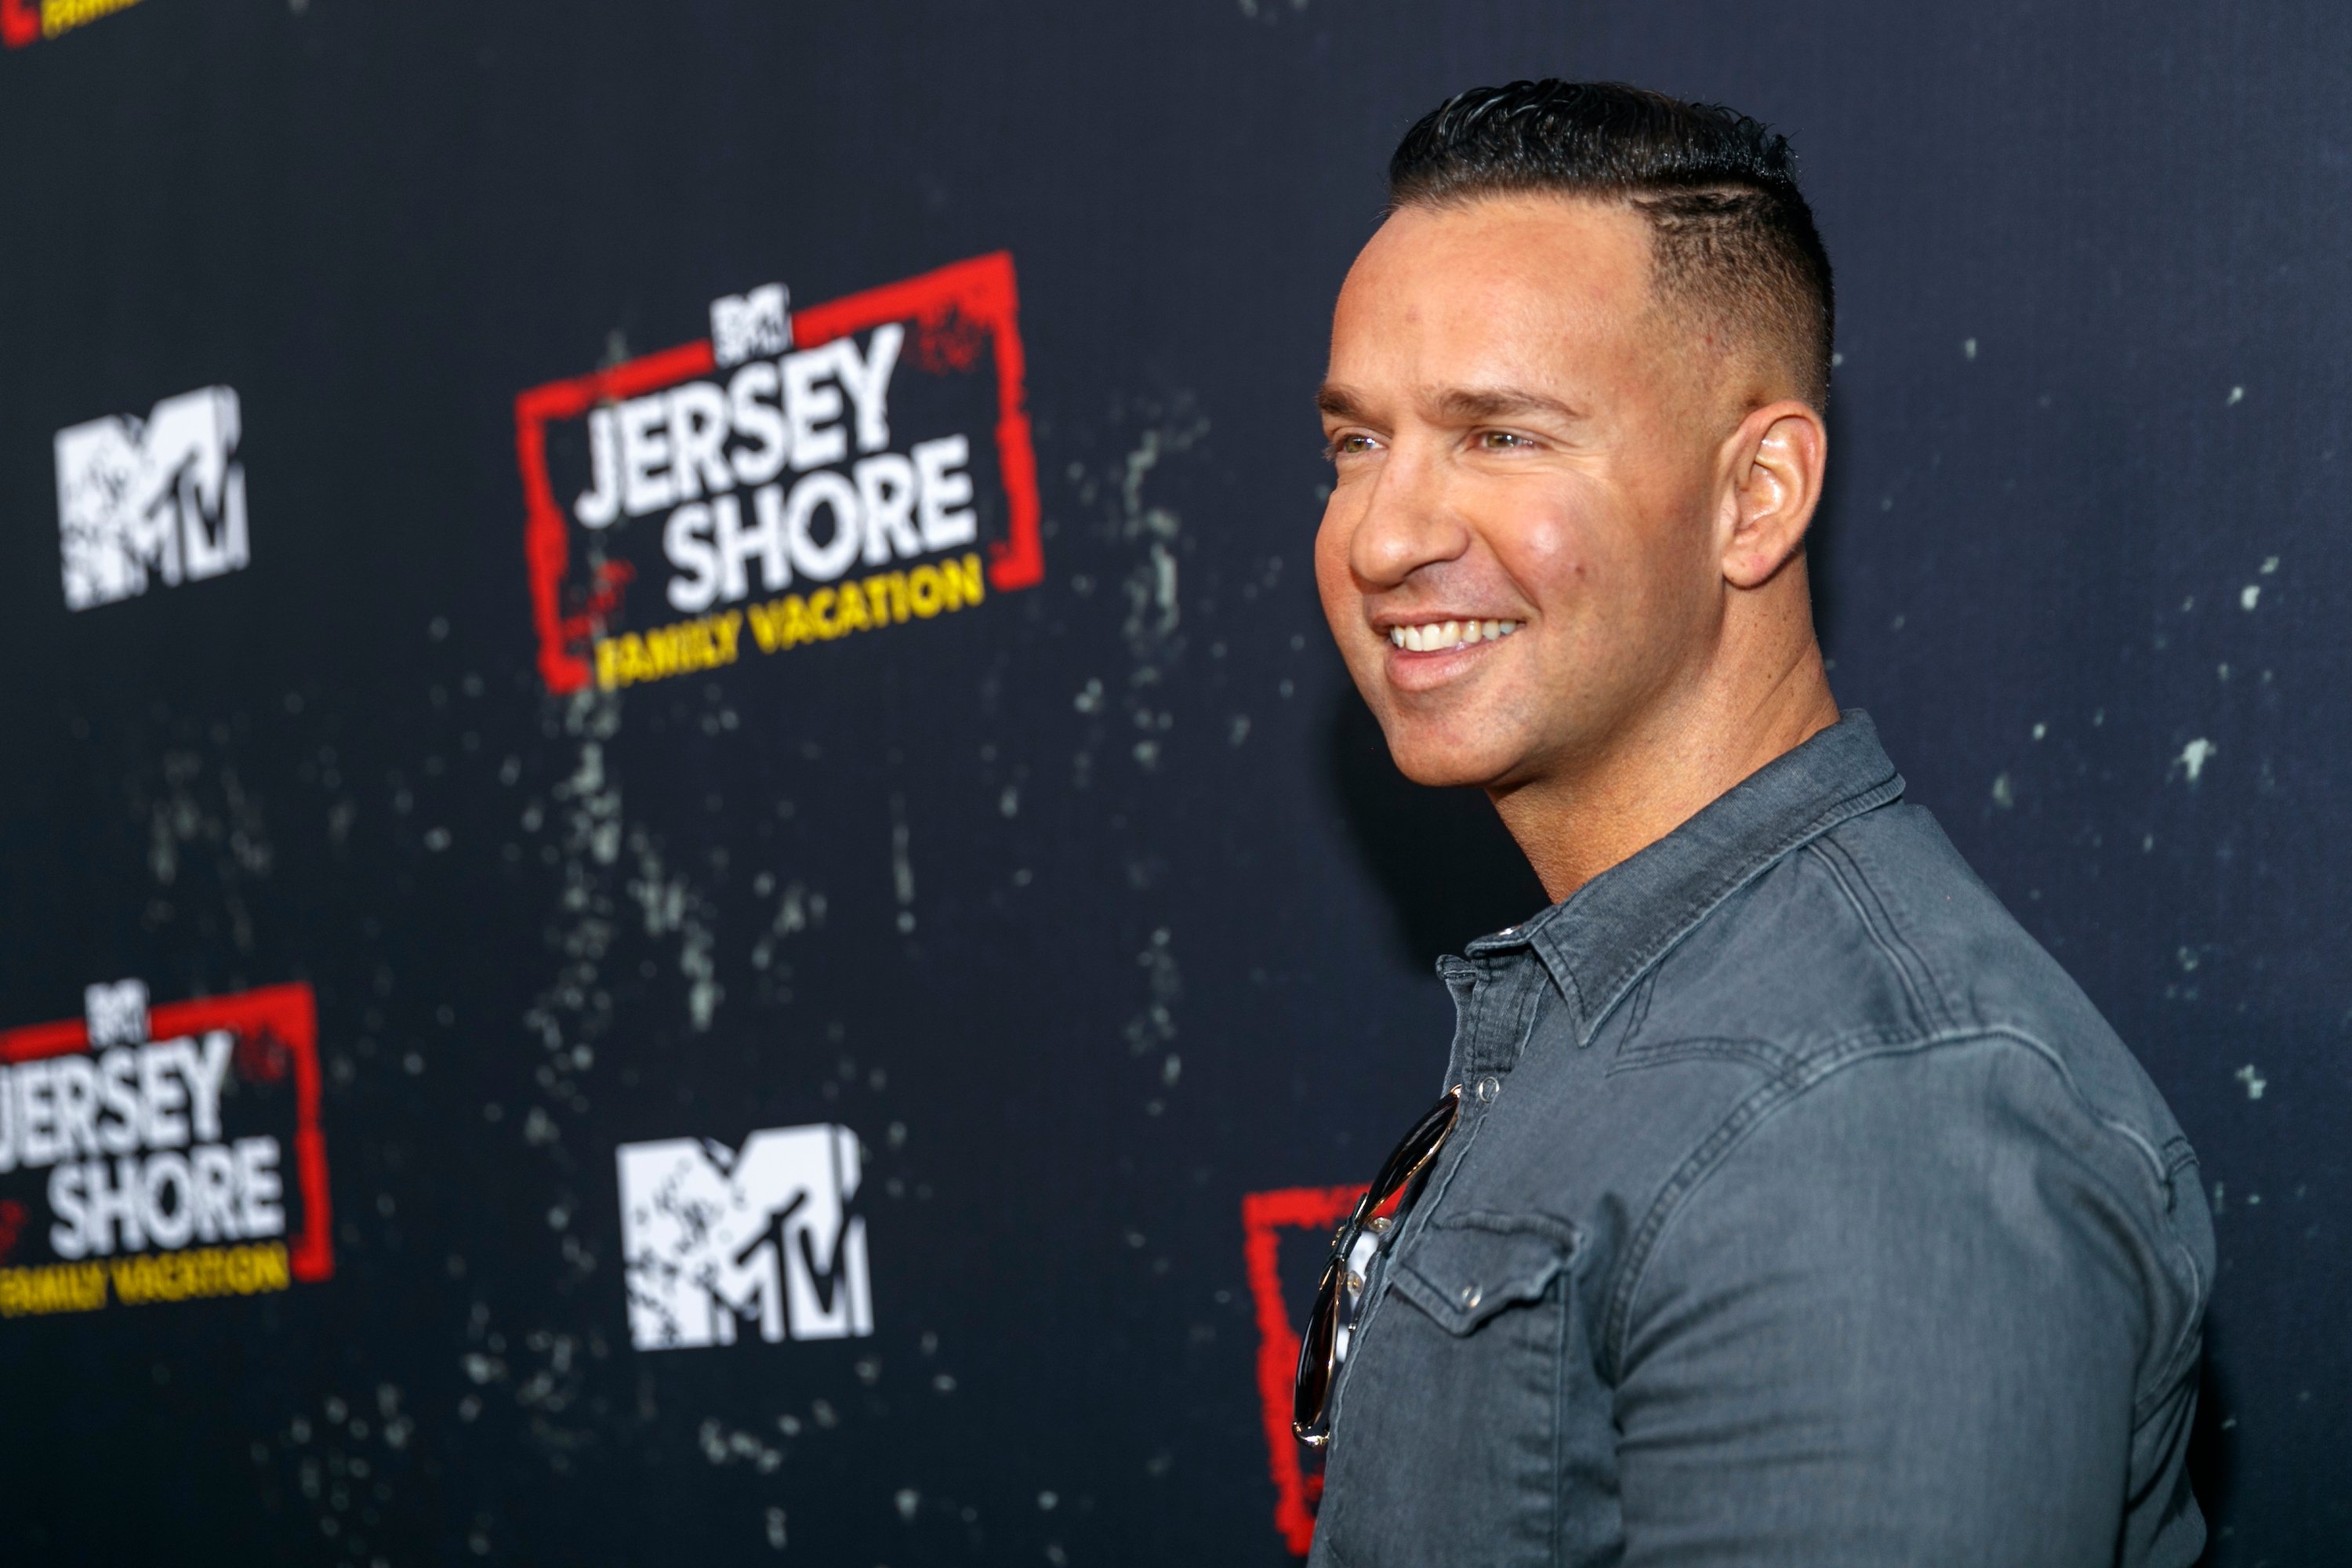 Mike 'The Situation' Sorrentino, who is known for his catchphrases from 'Jersey Shore: Family Vacation'